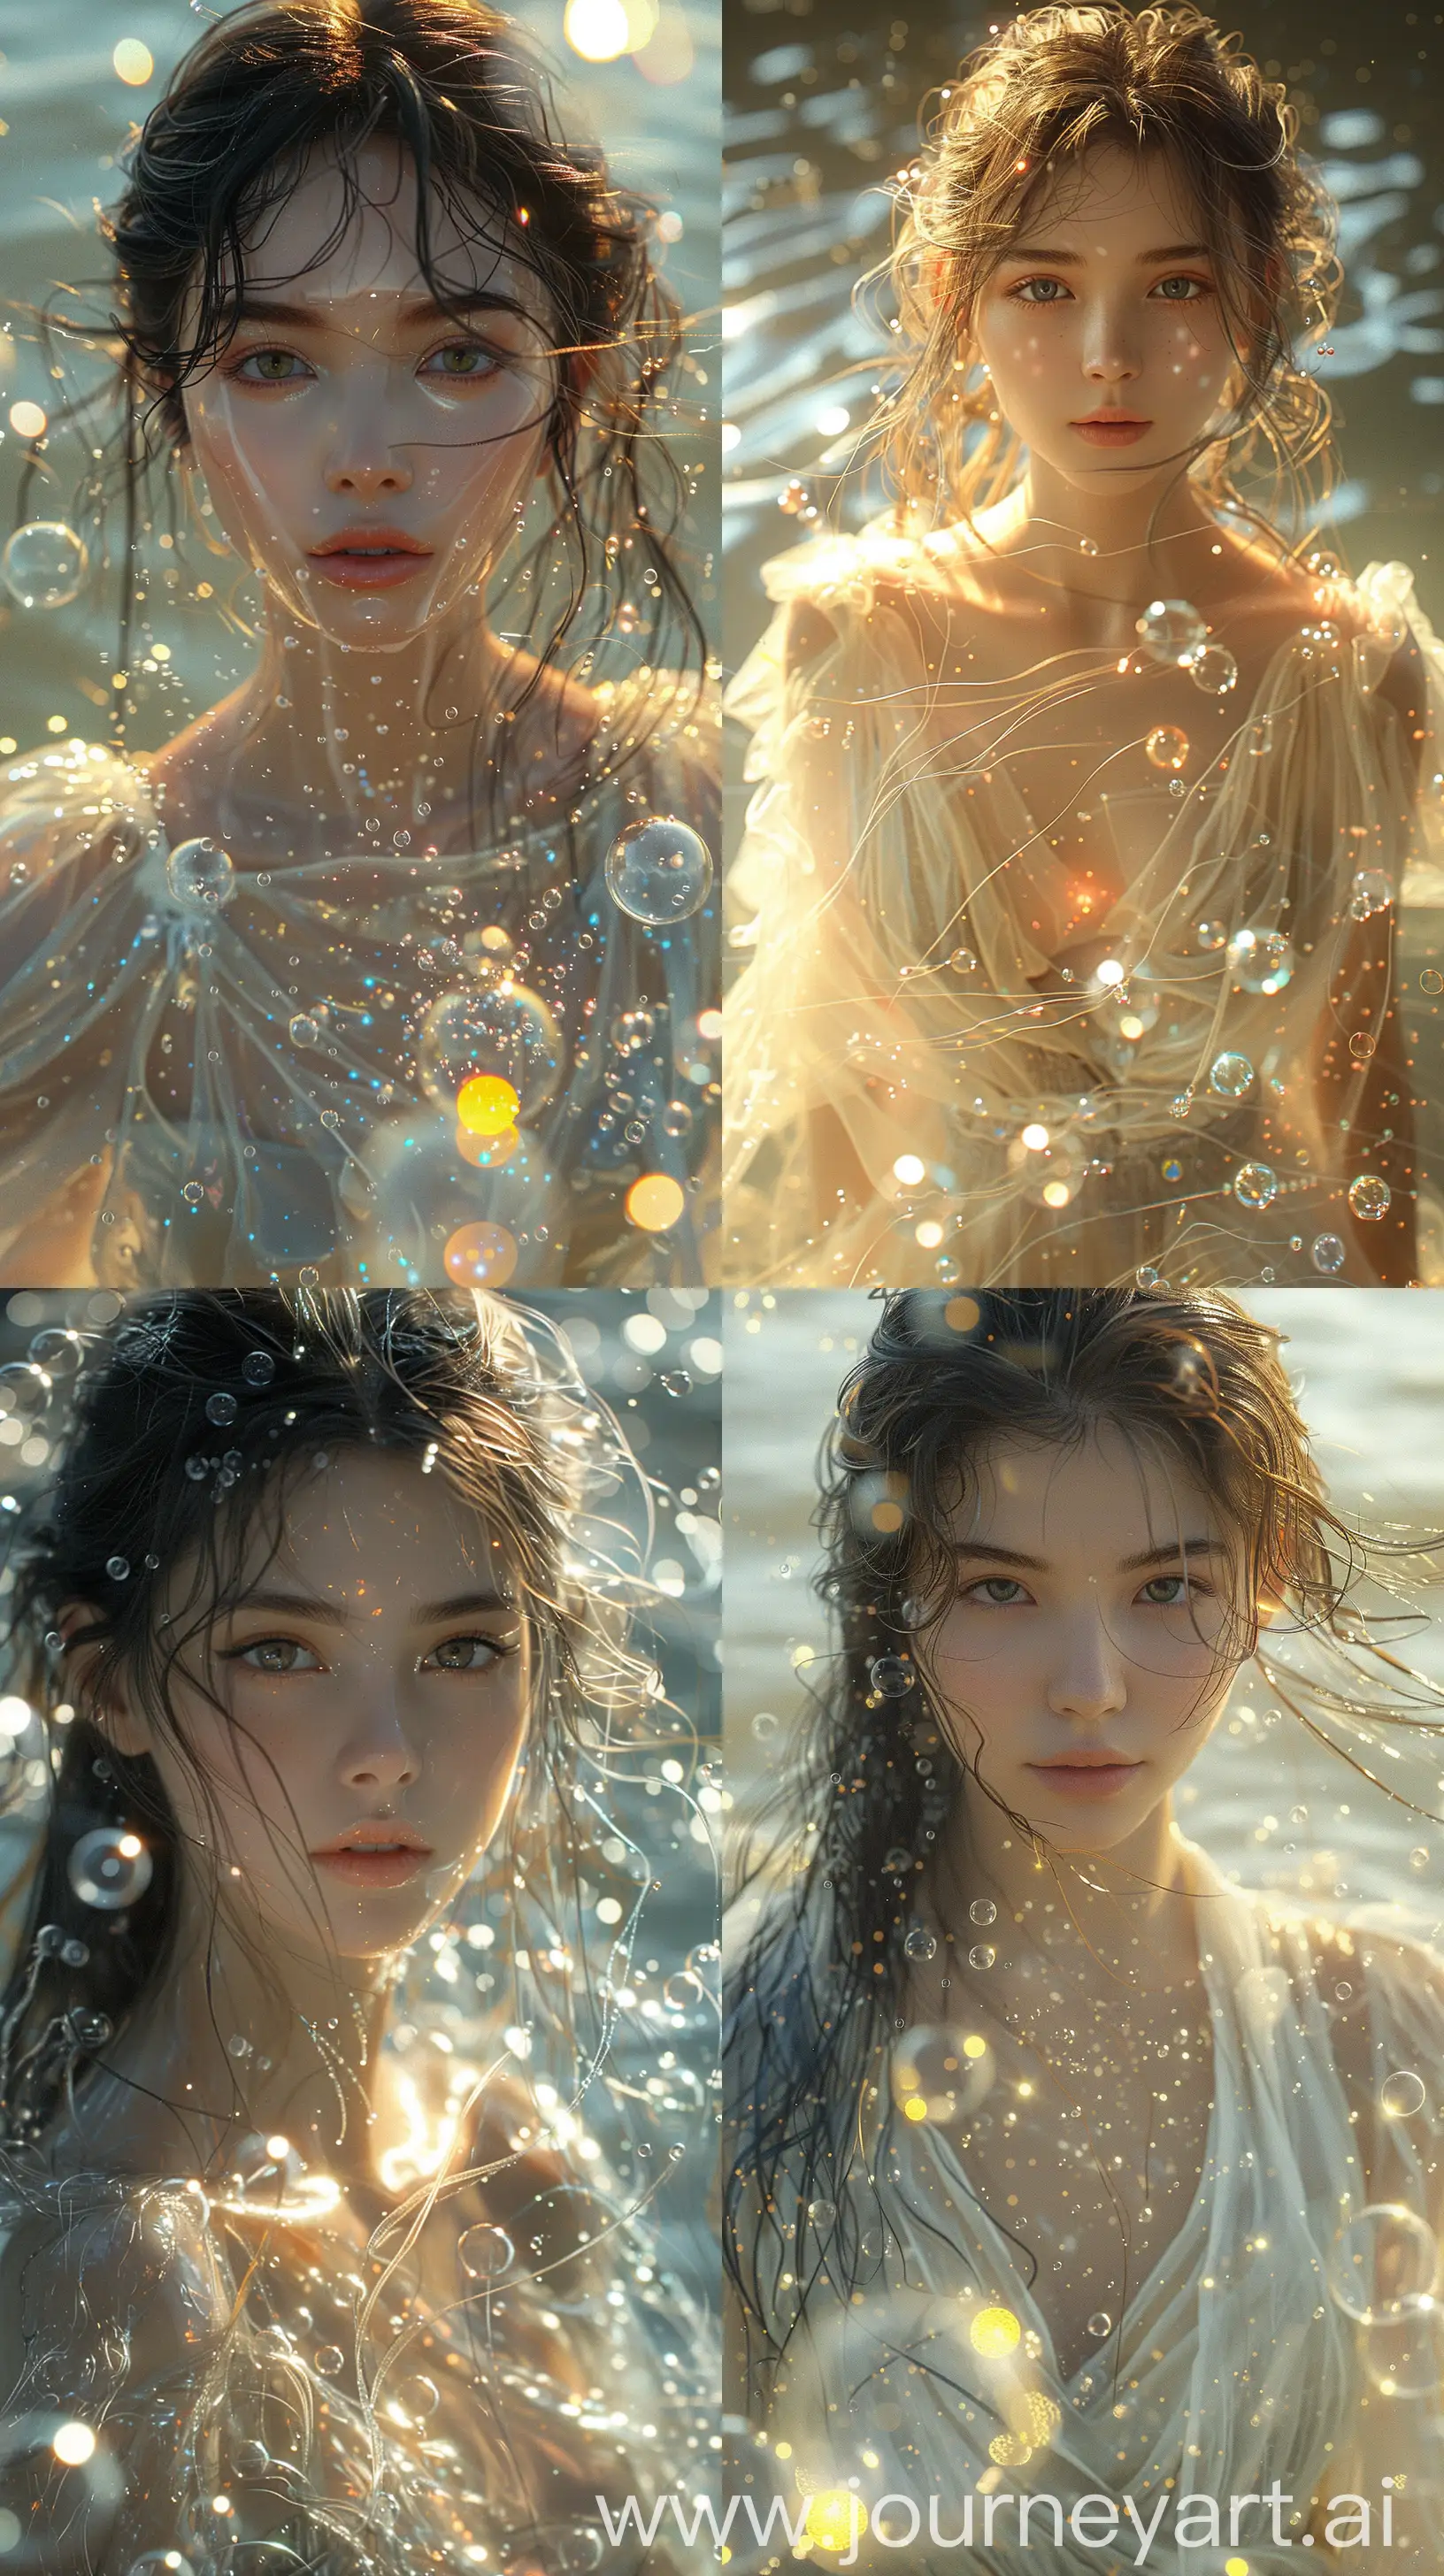 Magical-Girl-in-Ethereal-Waters-Glowing-Threads-of-Fantasy-Art